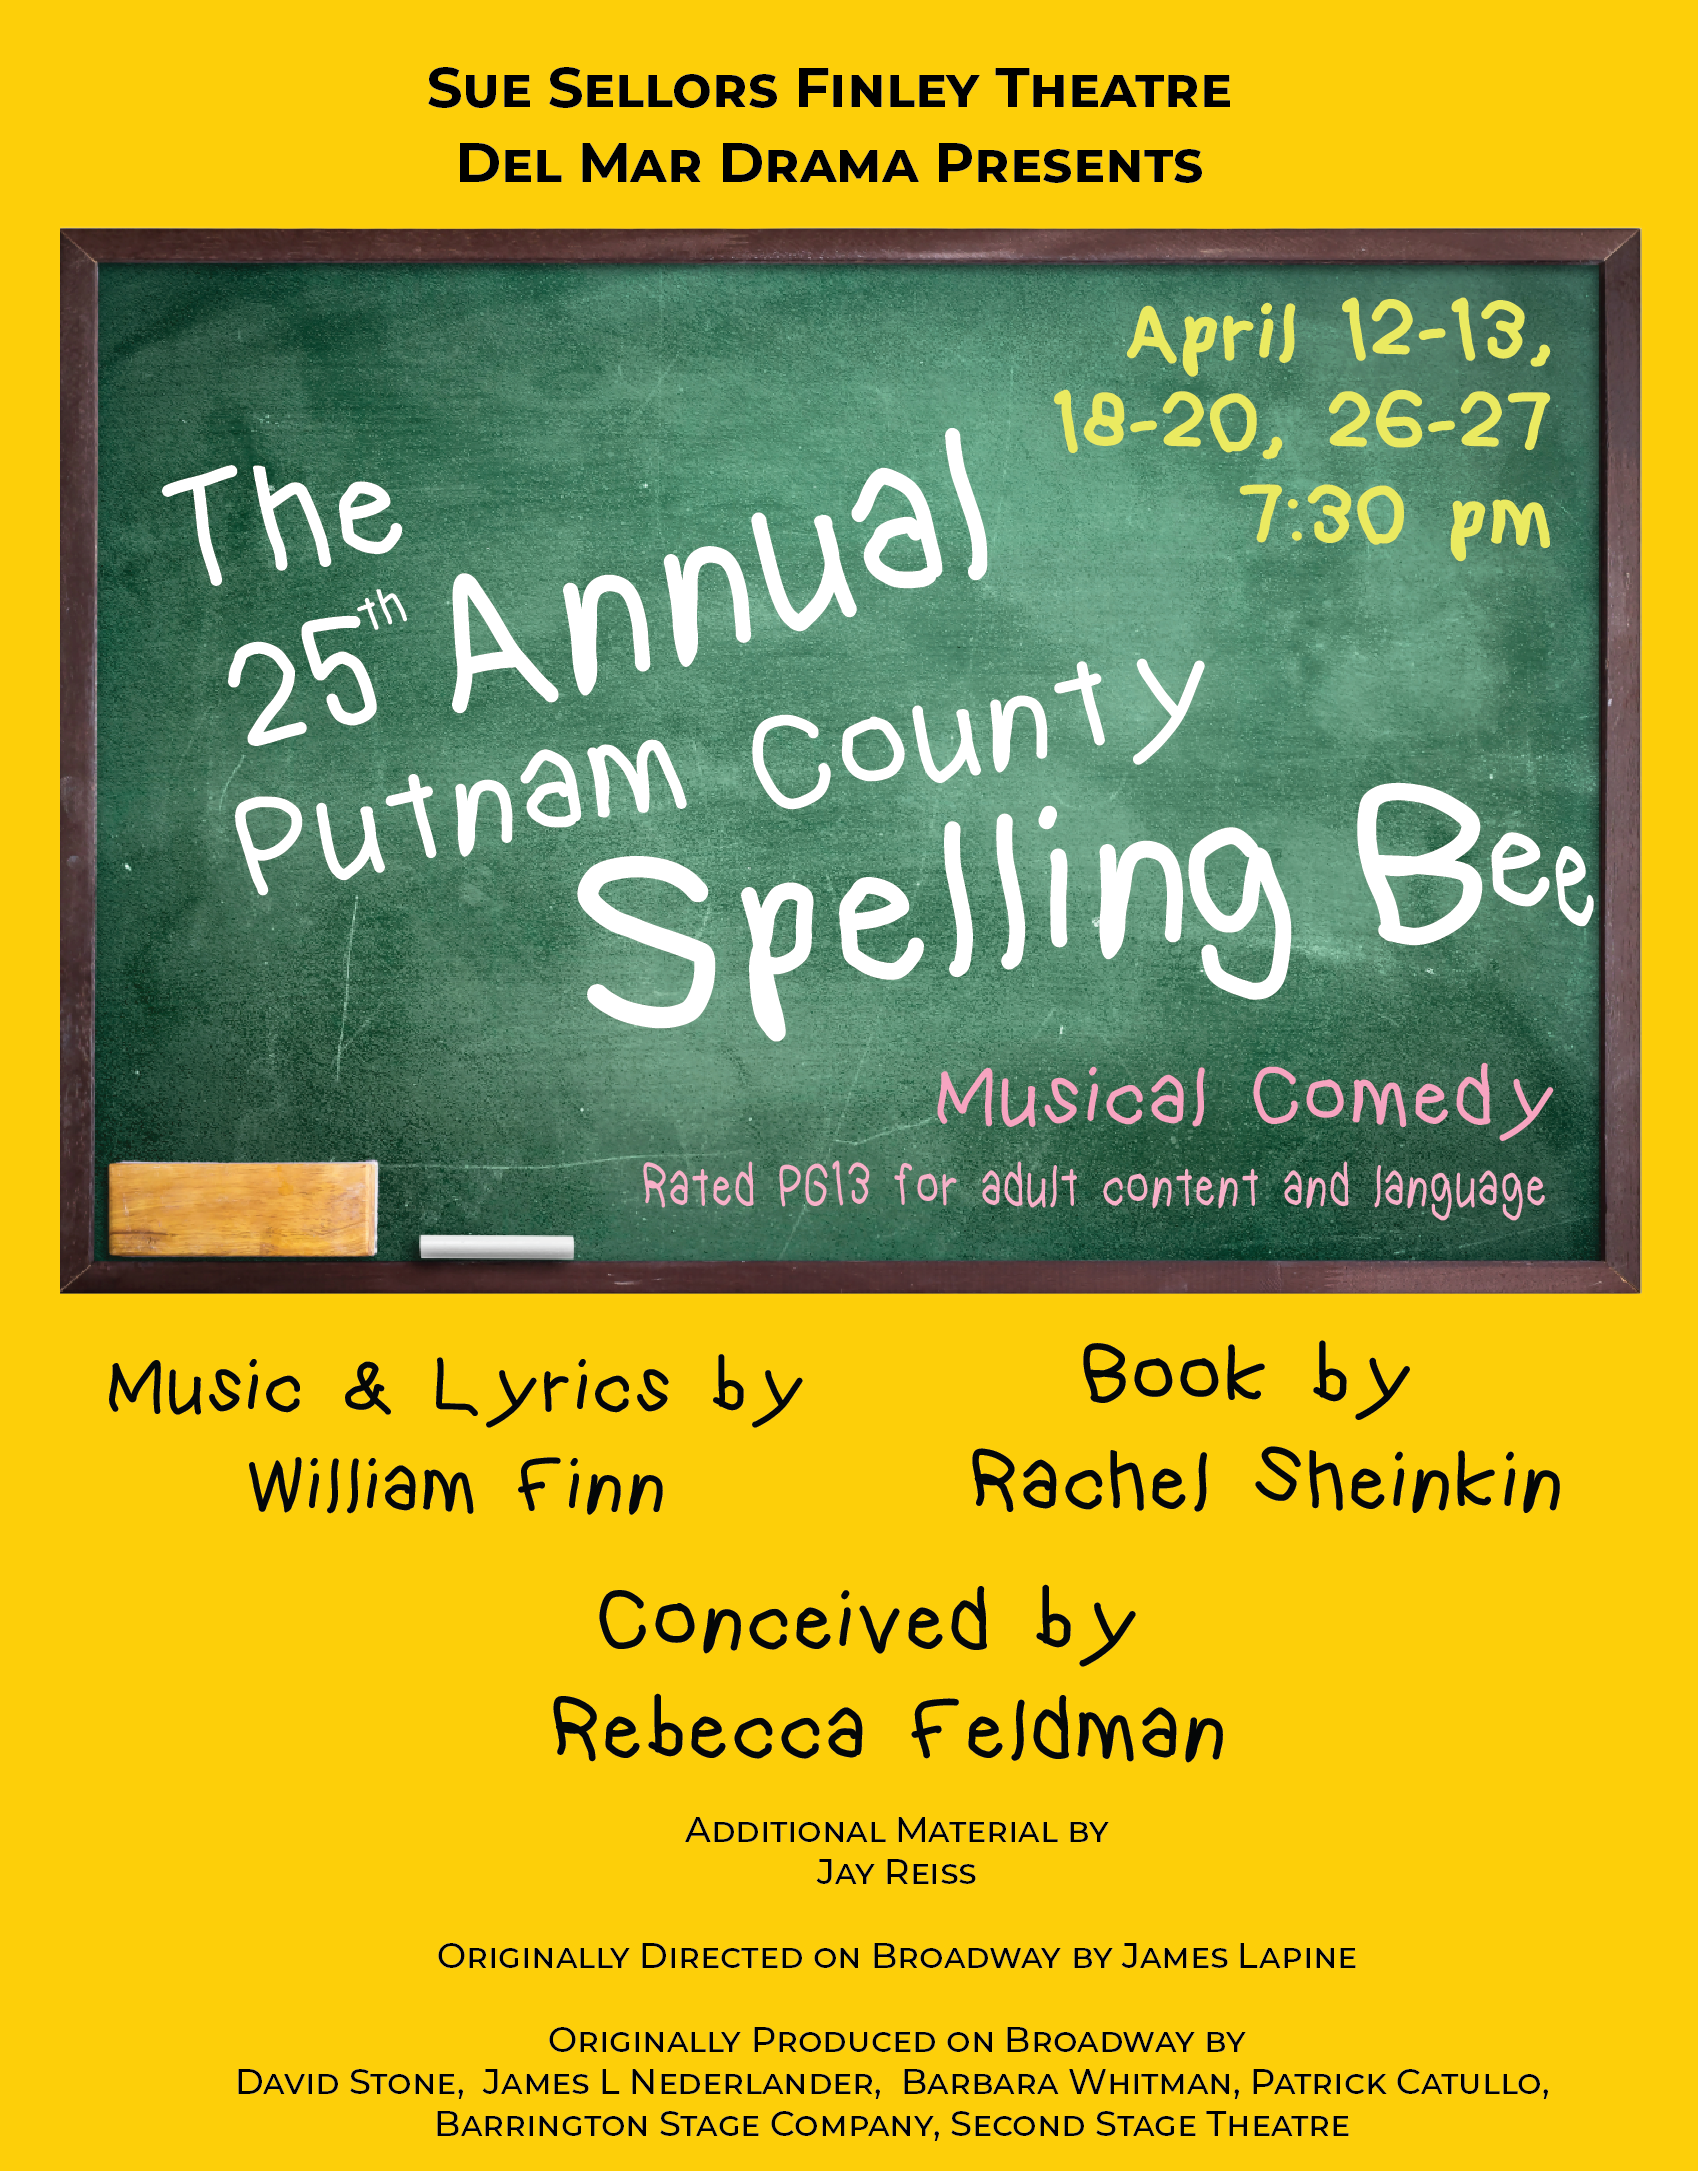 Poster for the musical comedy